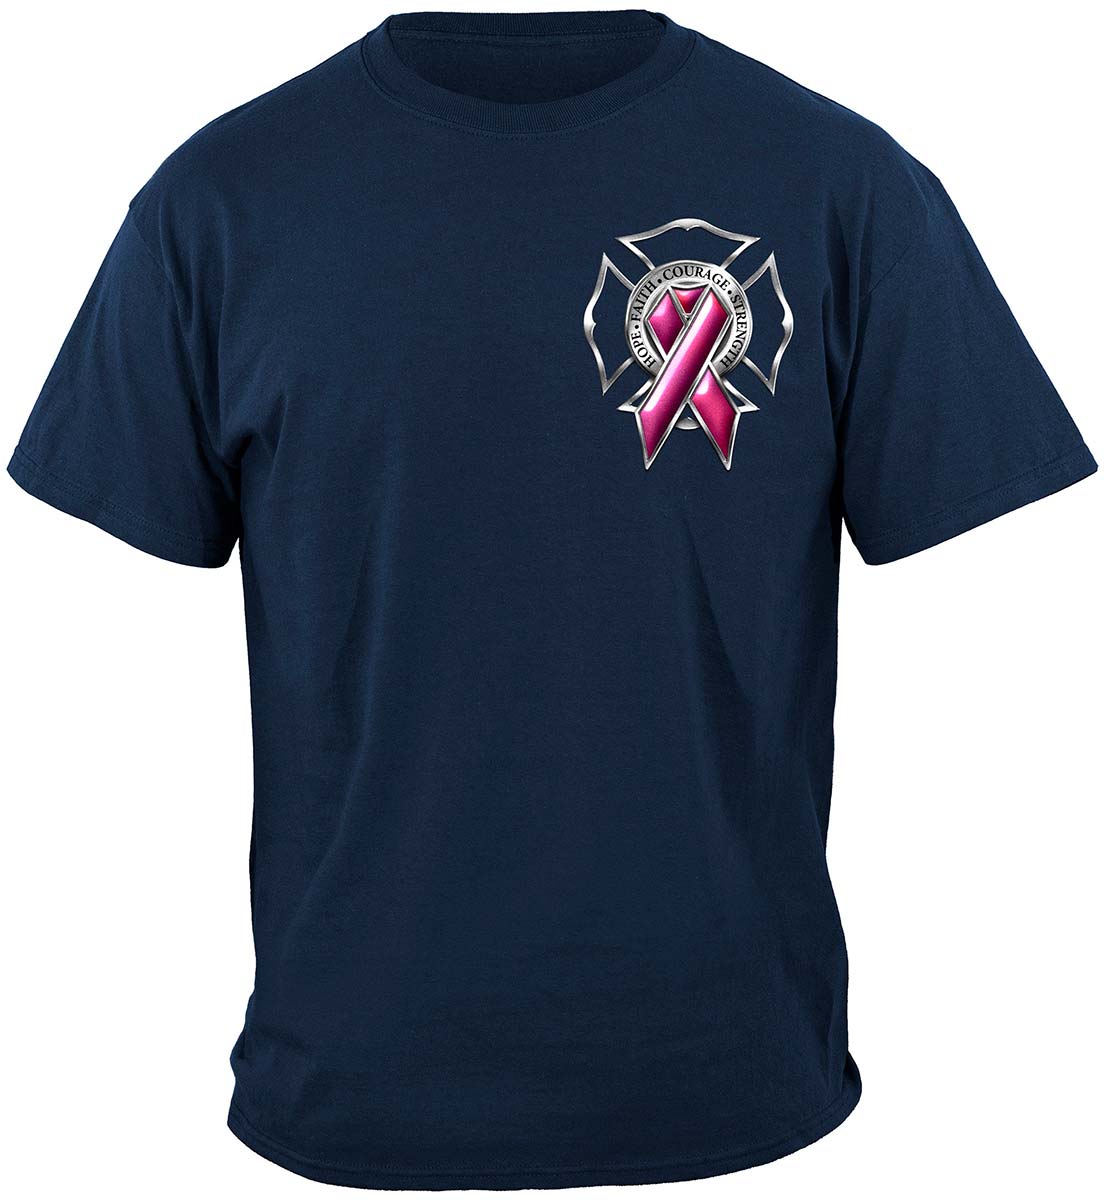 Firefighter Race For A Cure Premium T-Shirt